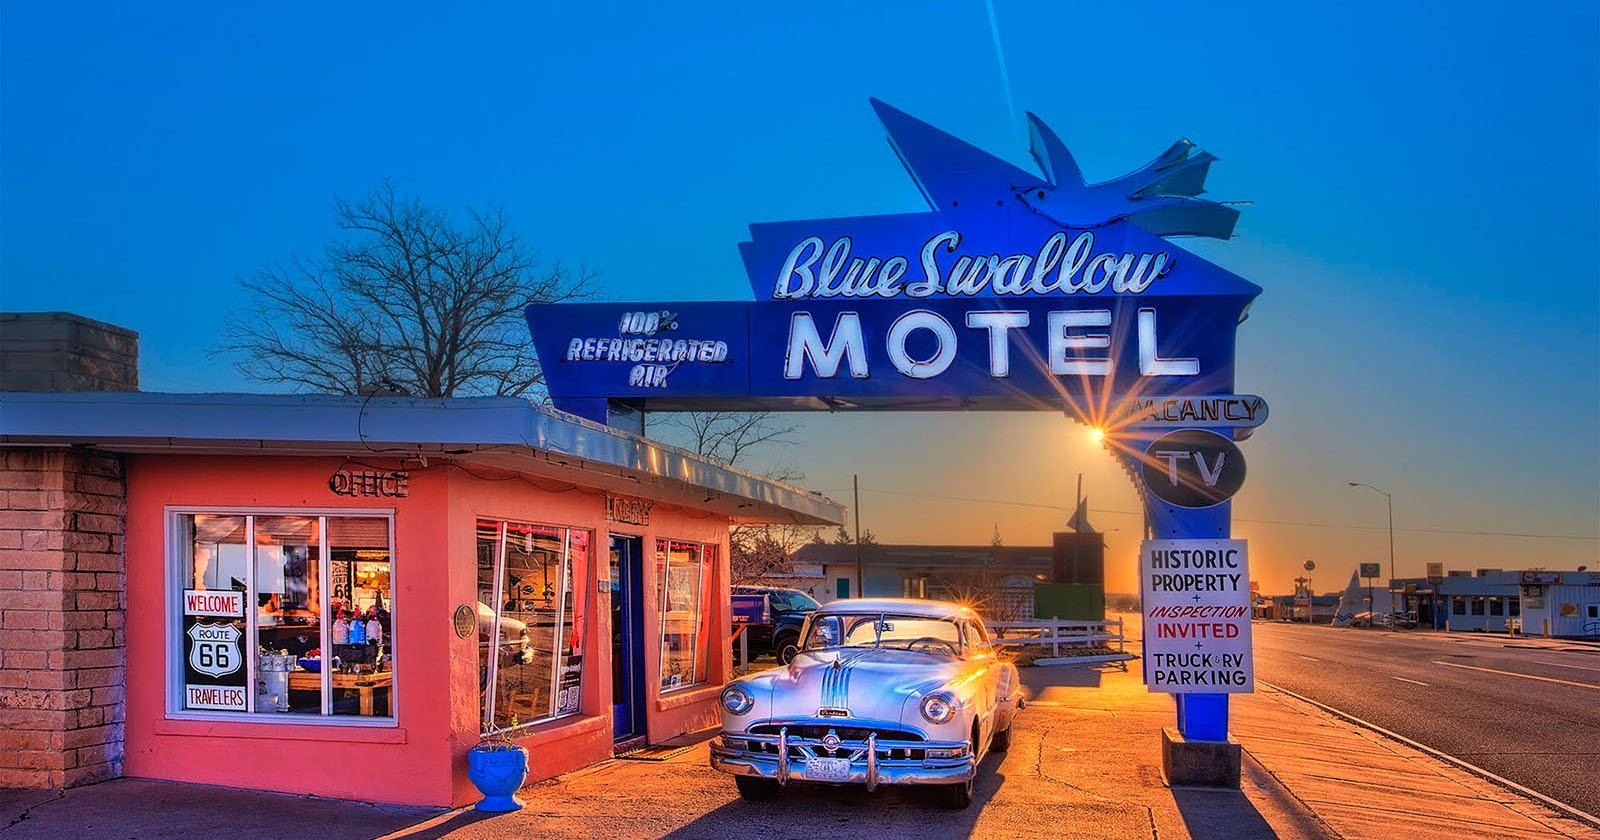 How Photographer Rick Sammon Shot the Blue Swallow Motel in HDR